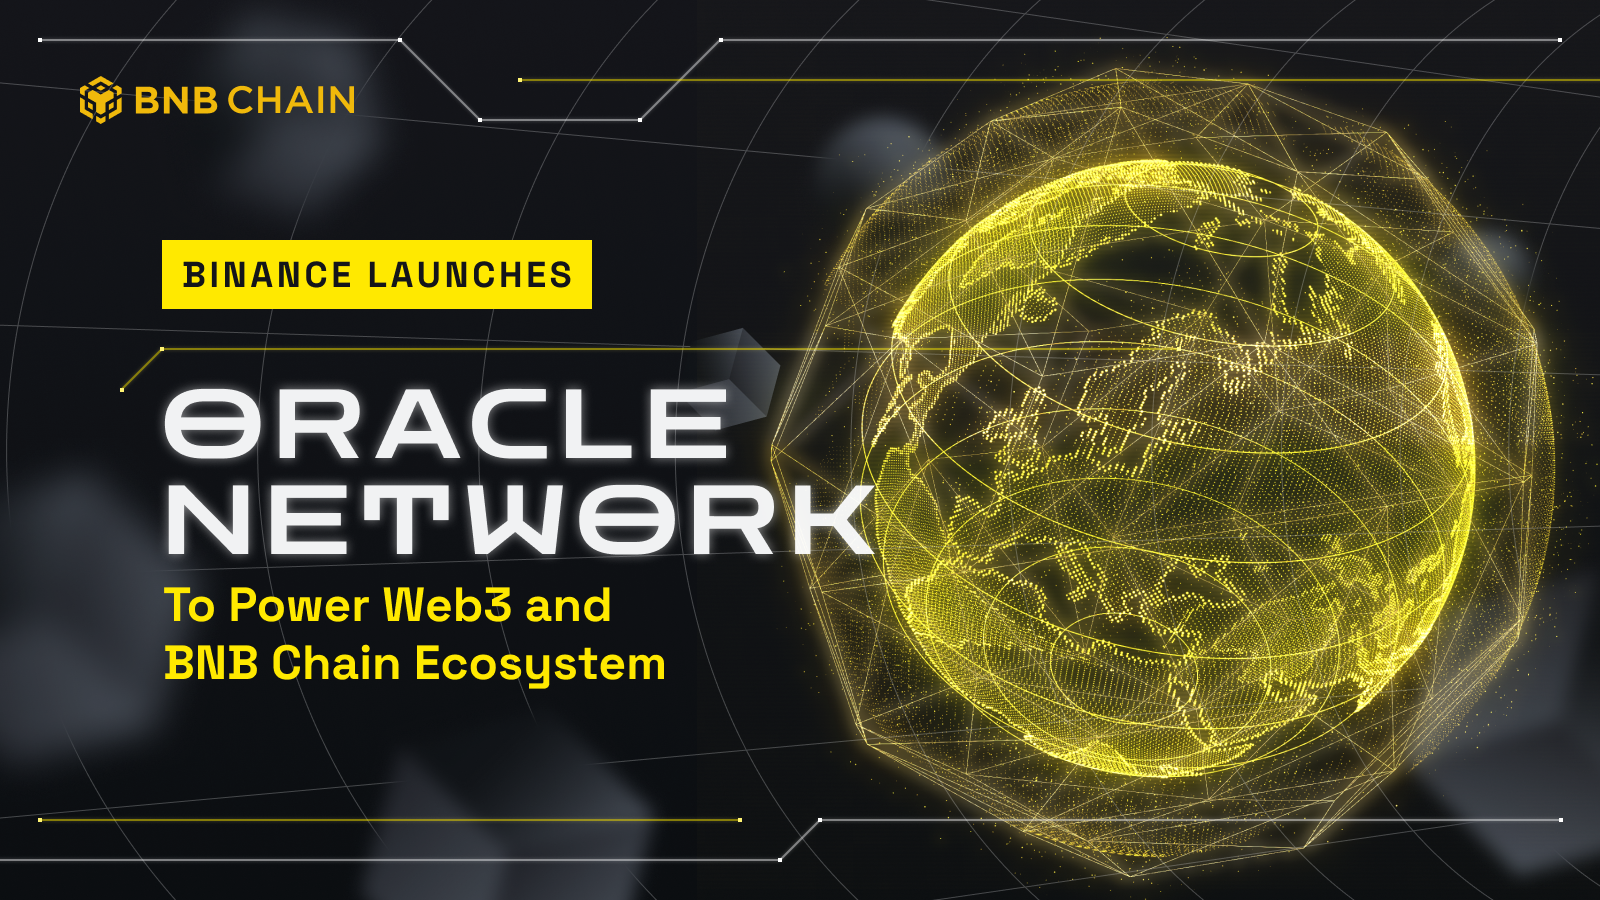 Binance Launches Oracle Network to Power Web3 and BNB Chain Ecosystem